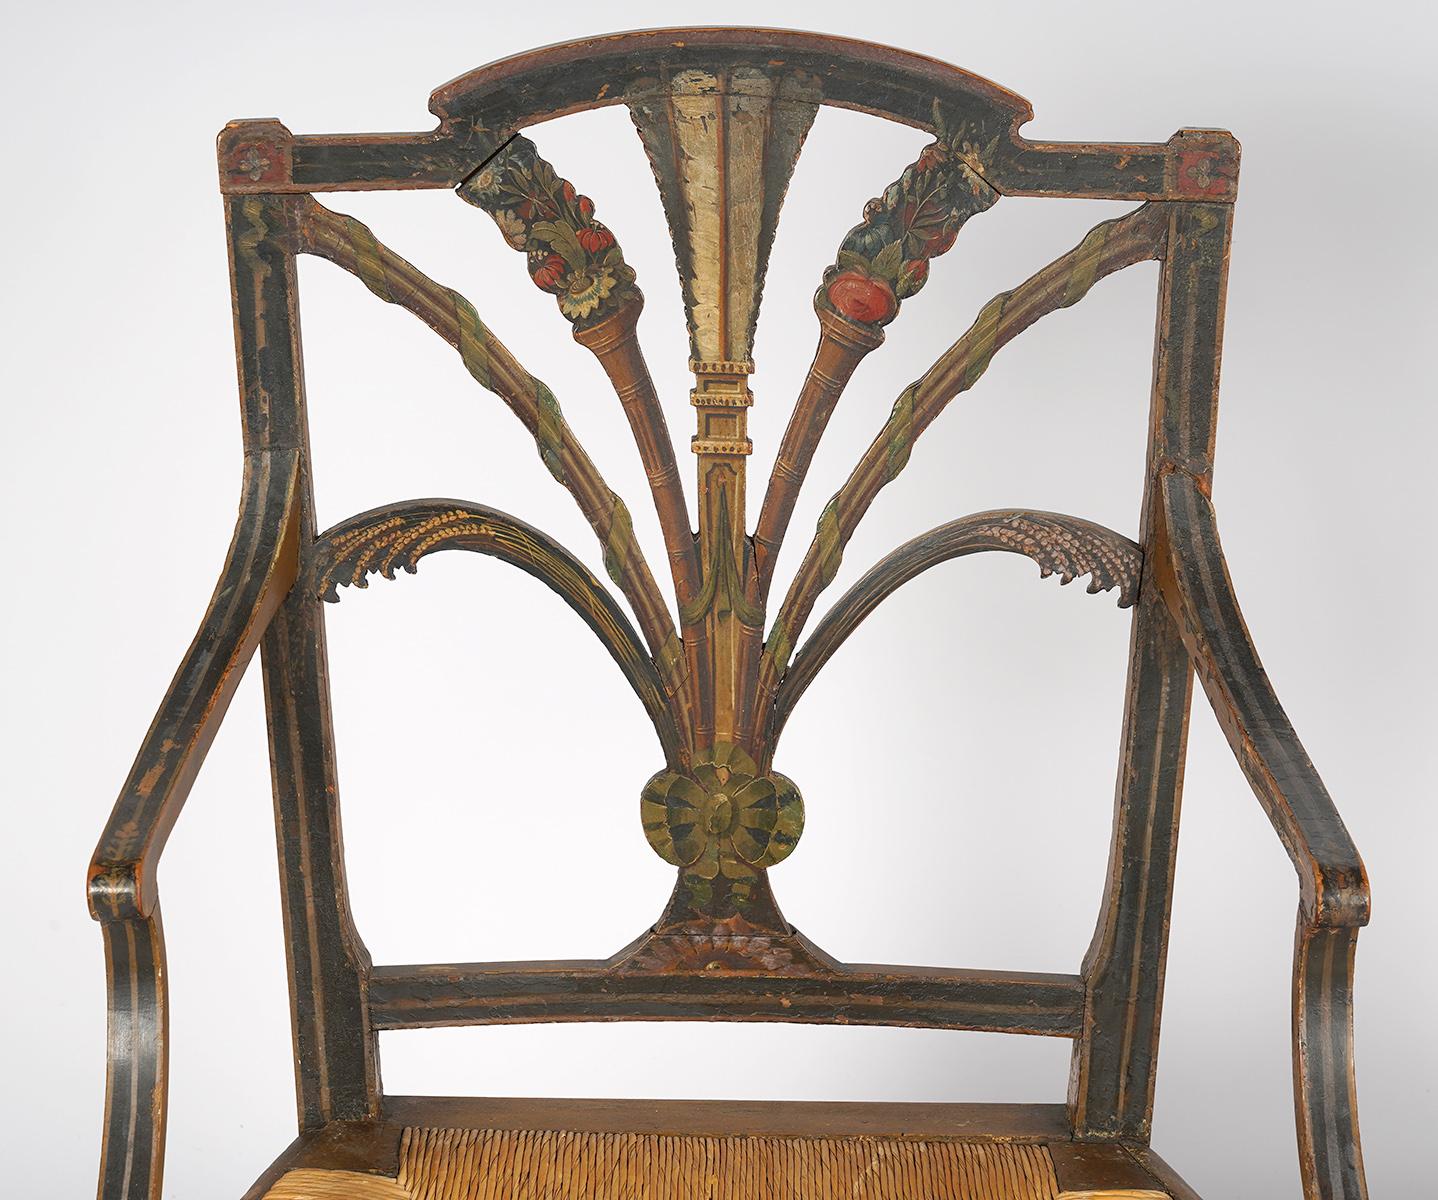 Creating a lovely countryside ambiance these painted rush seat regency chairs are richly decorated with flowers, sheafs of wheat, fruits, ribbons and on the center splat heraldic feathers, 19th century. The chairs date to circa 1830.